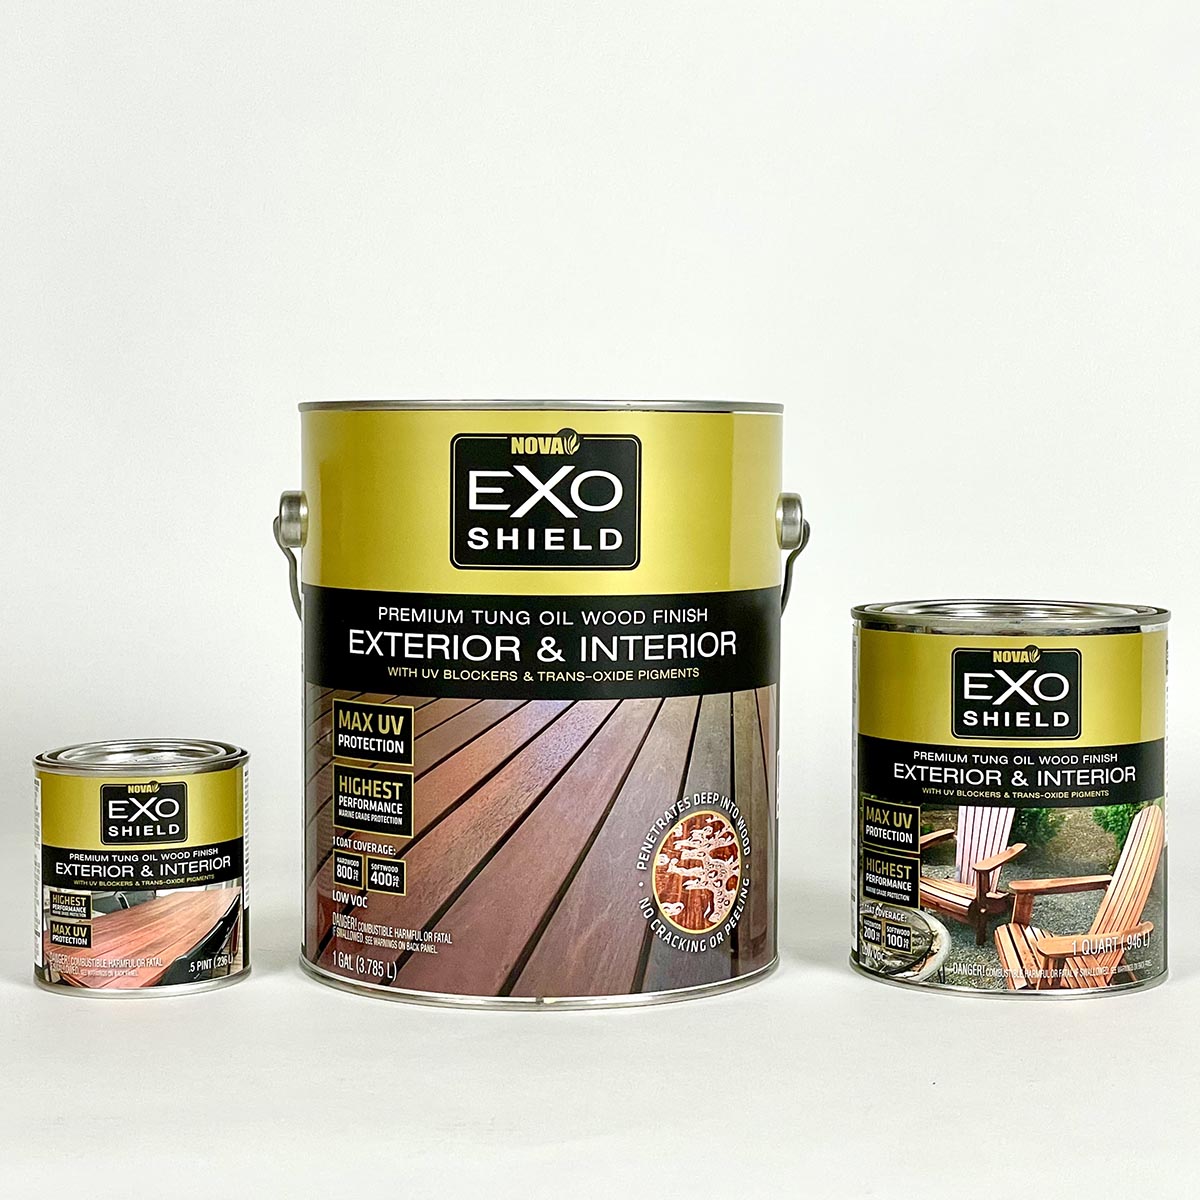 ExoShield Premium Wood Stain is Available in 7 Colors in Gallons, Quarts & Half Pints